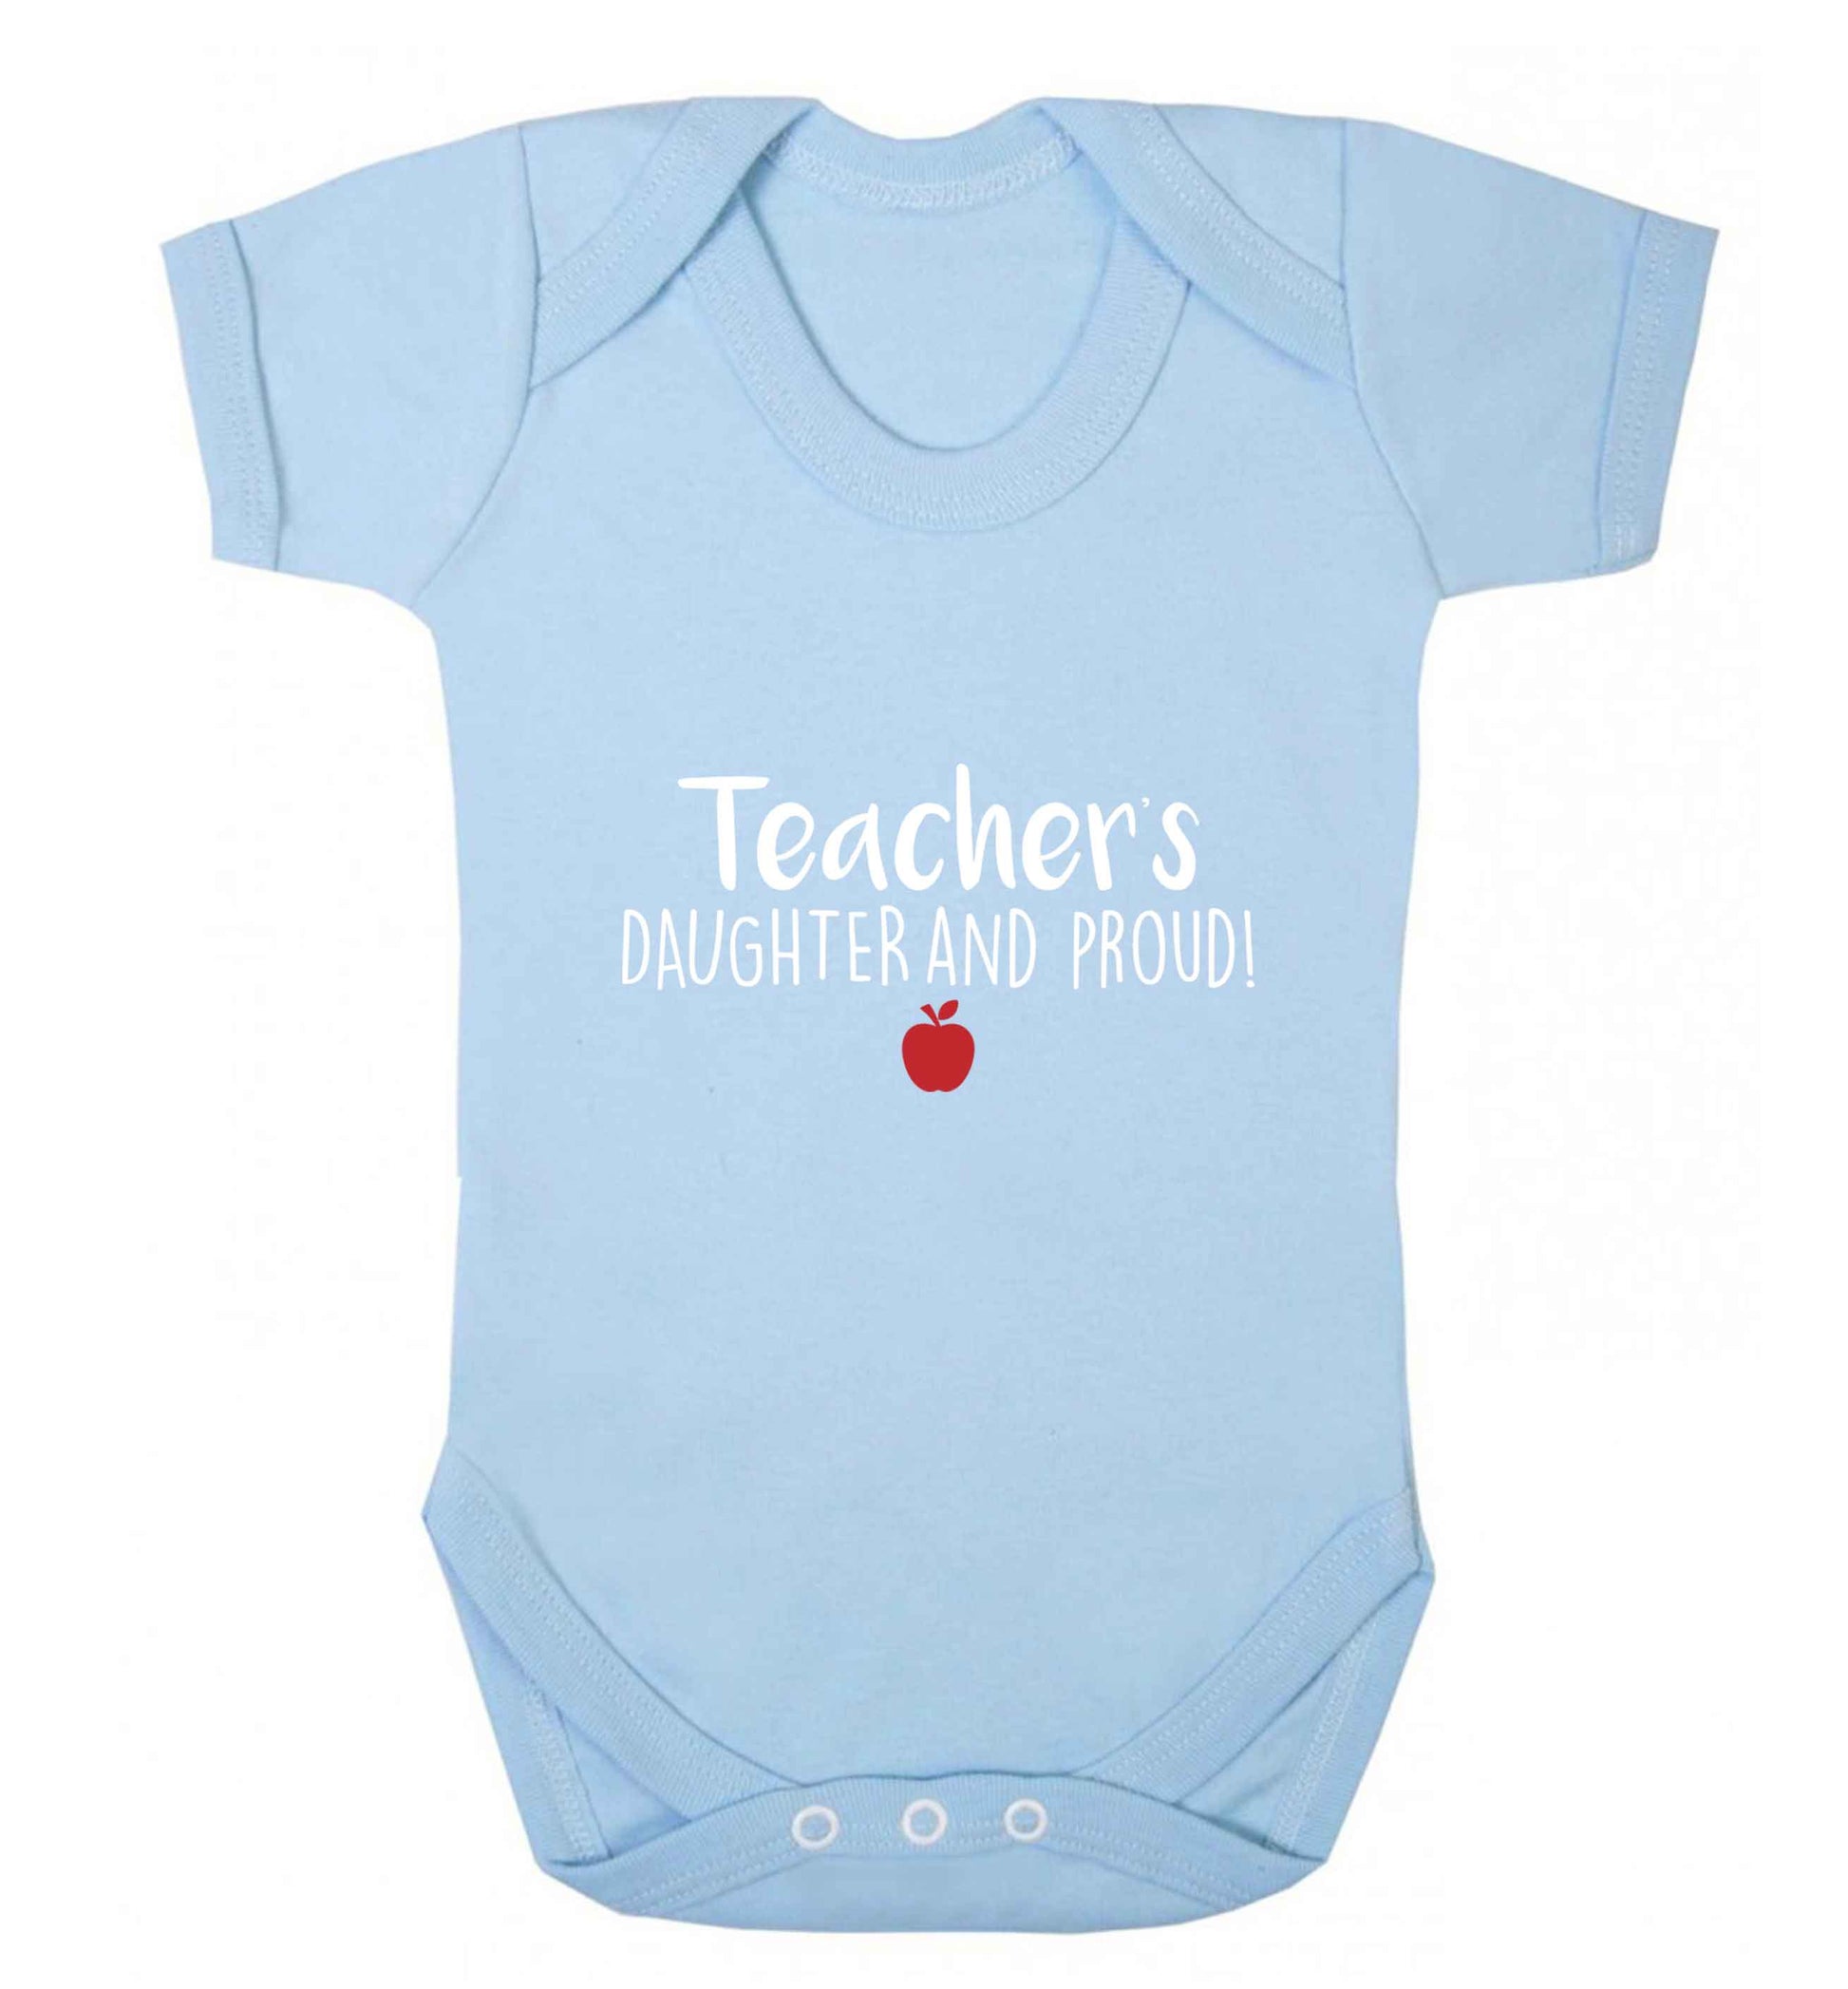 Teachers daughter and proud baby vest pale blue 18-24 months